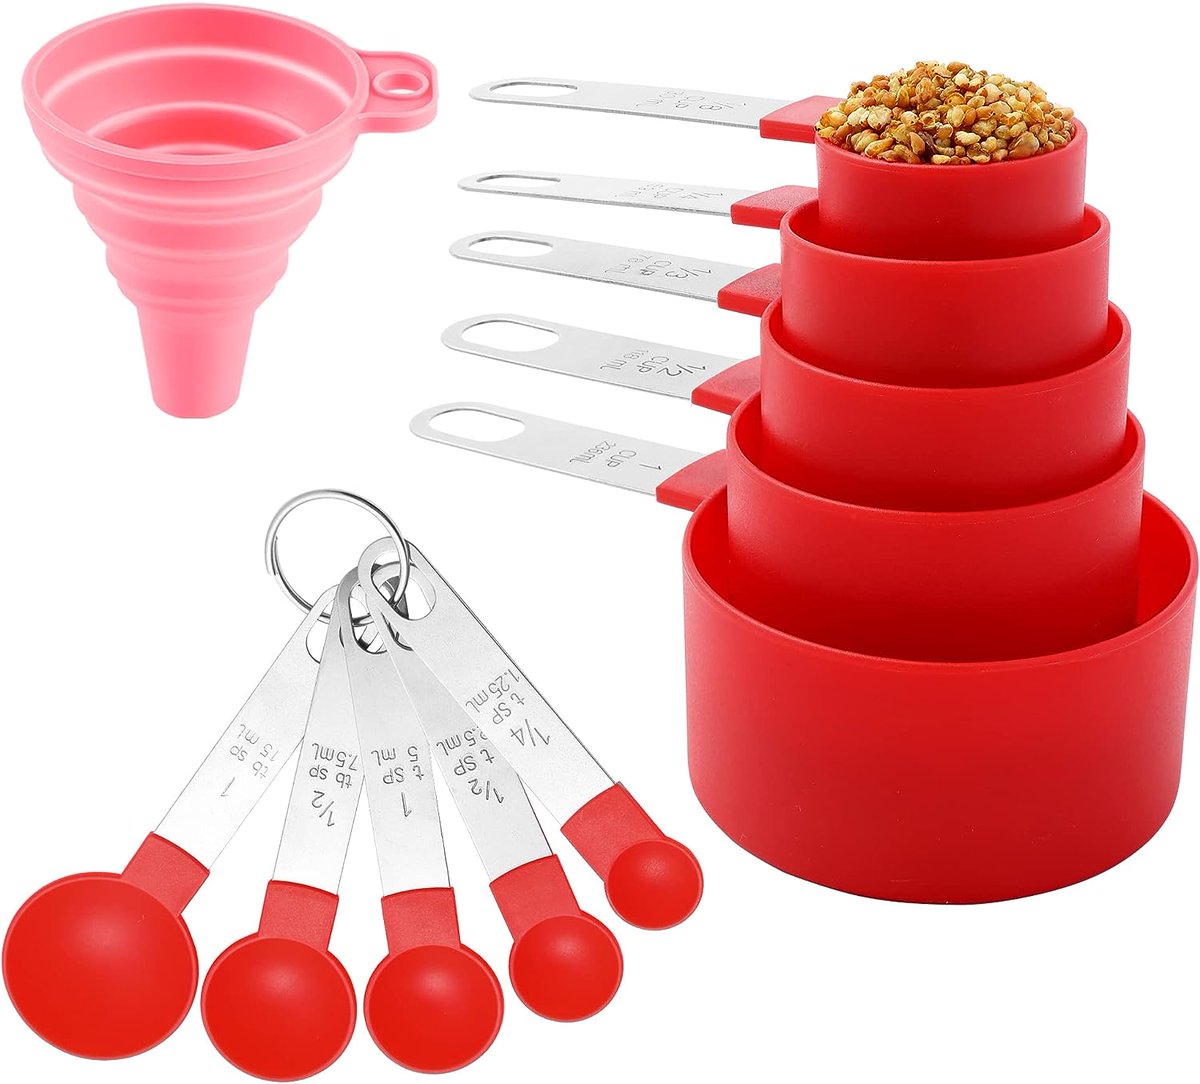 Best KitchenAid Measuring Cups Red – Top 8 Chosen For You! Read Full Review Here: topteneverworld.com/best-kitchenai… #measuringcups #measuringcups #measuringcups #glasscups #GLASSCUPS #glasscup #cups #cupsleeve #cupshecrew #cupsinframe #cupsandsaucers #cupsleeveevent #cup #cupping